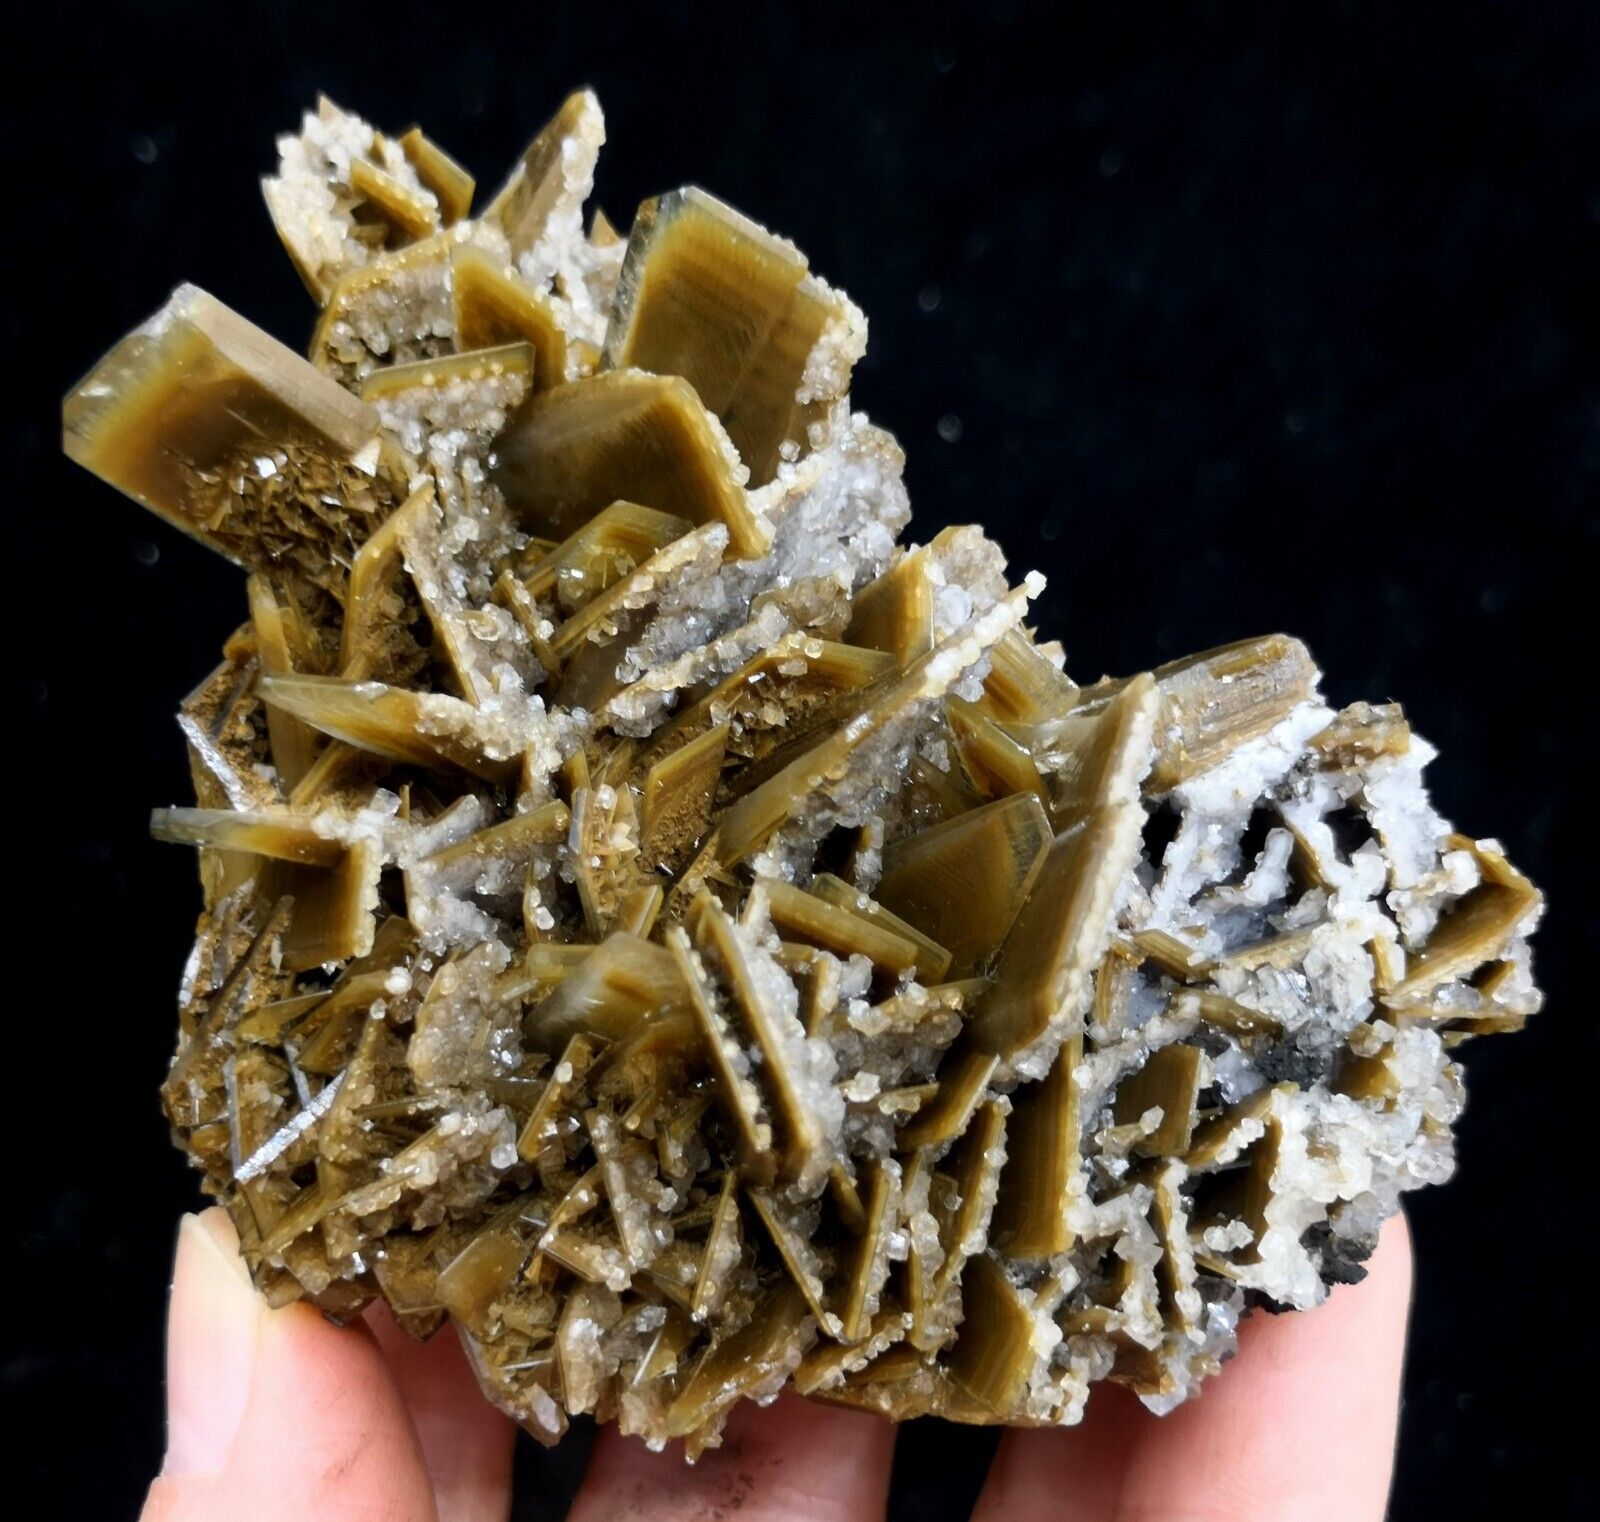 New find 83mm 224g Calcite on Barite, Natural Mineral Specimen from China